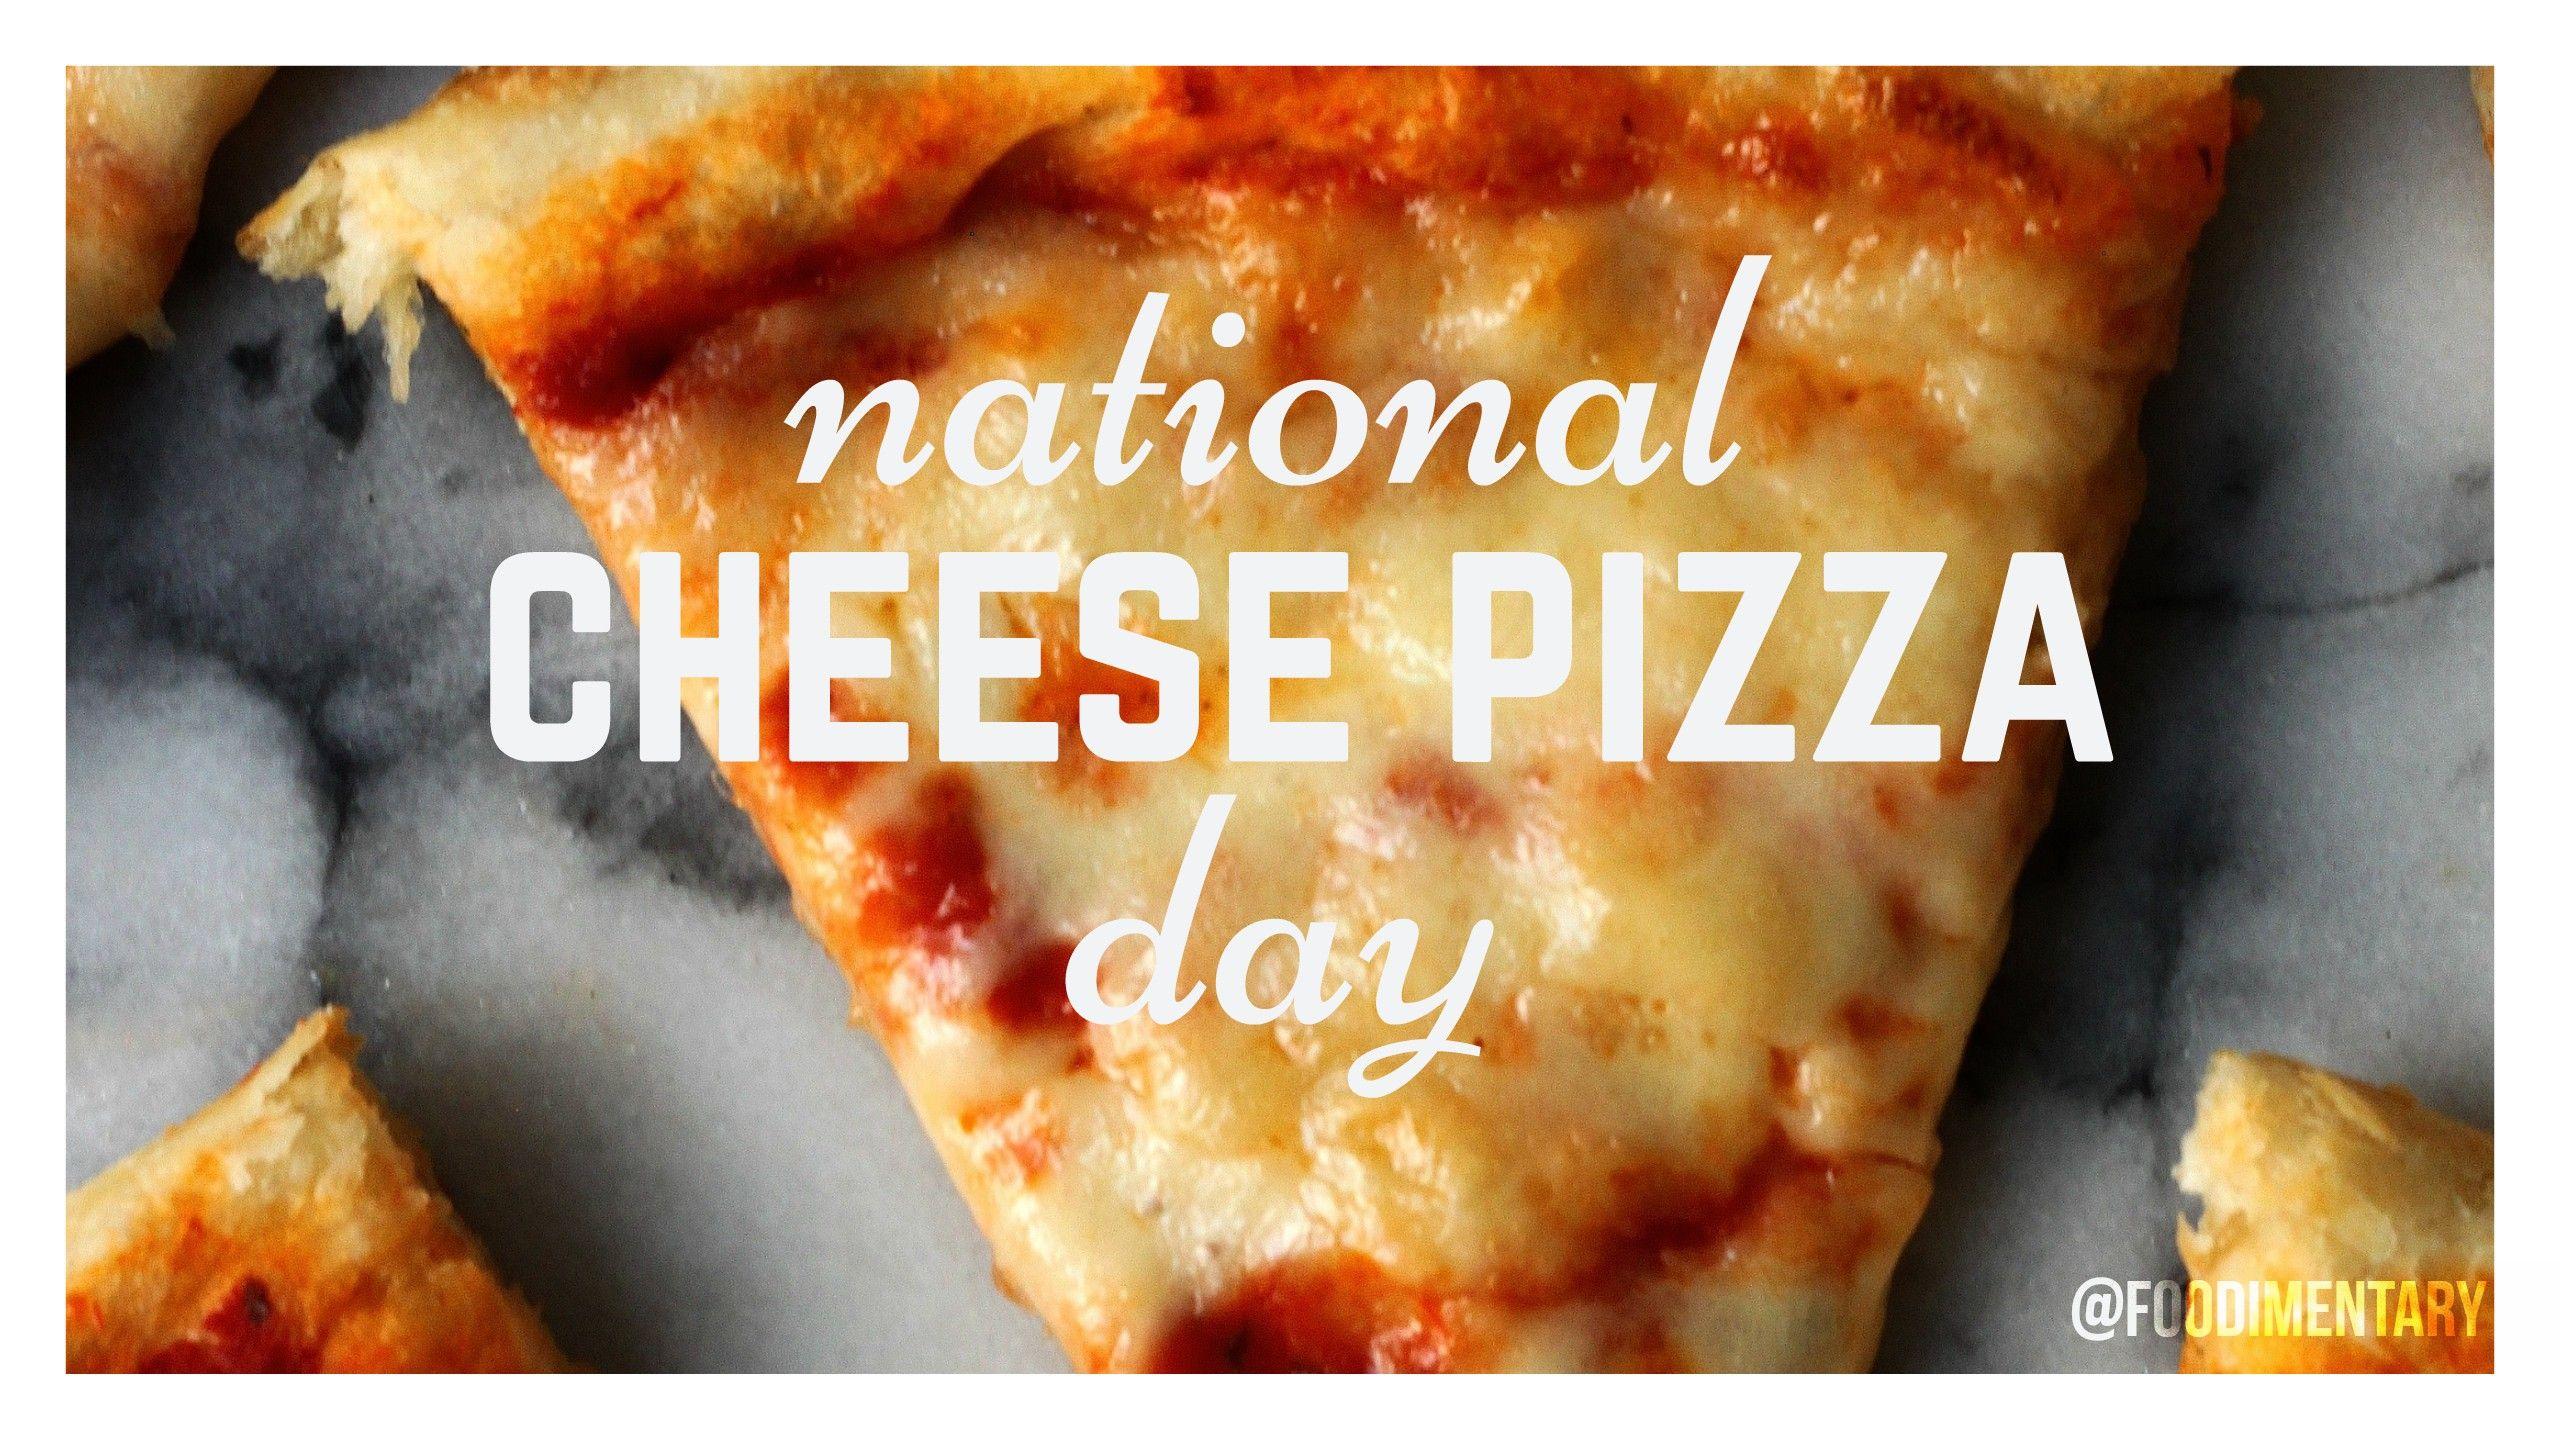 September 5th is National Cheese Pizza Day!. Foodimentary